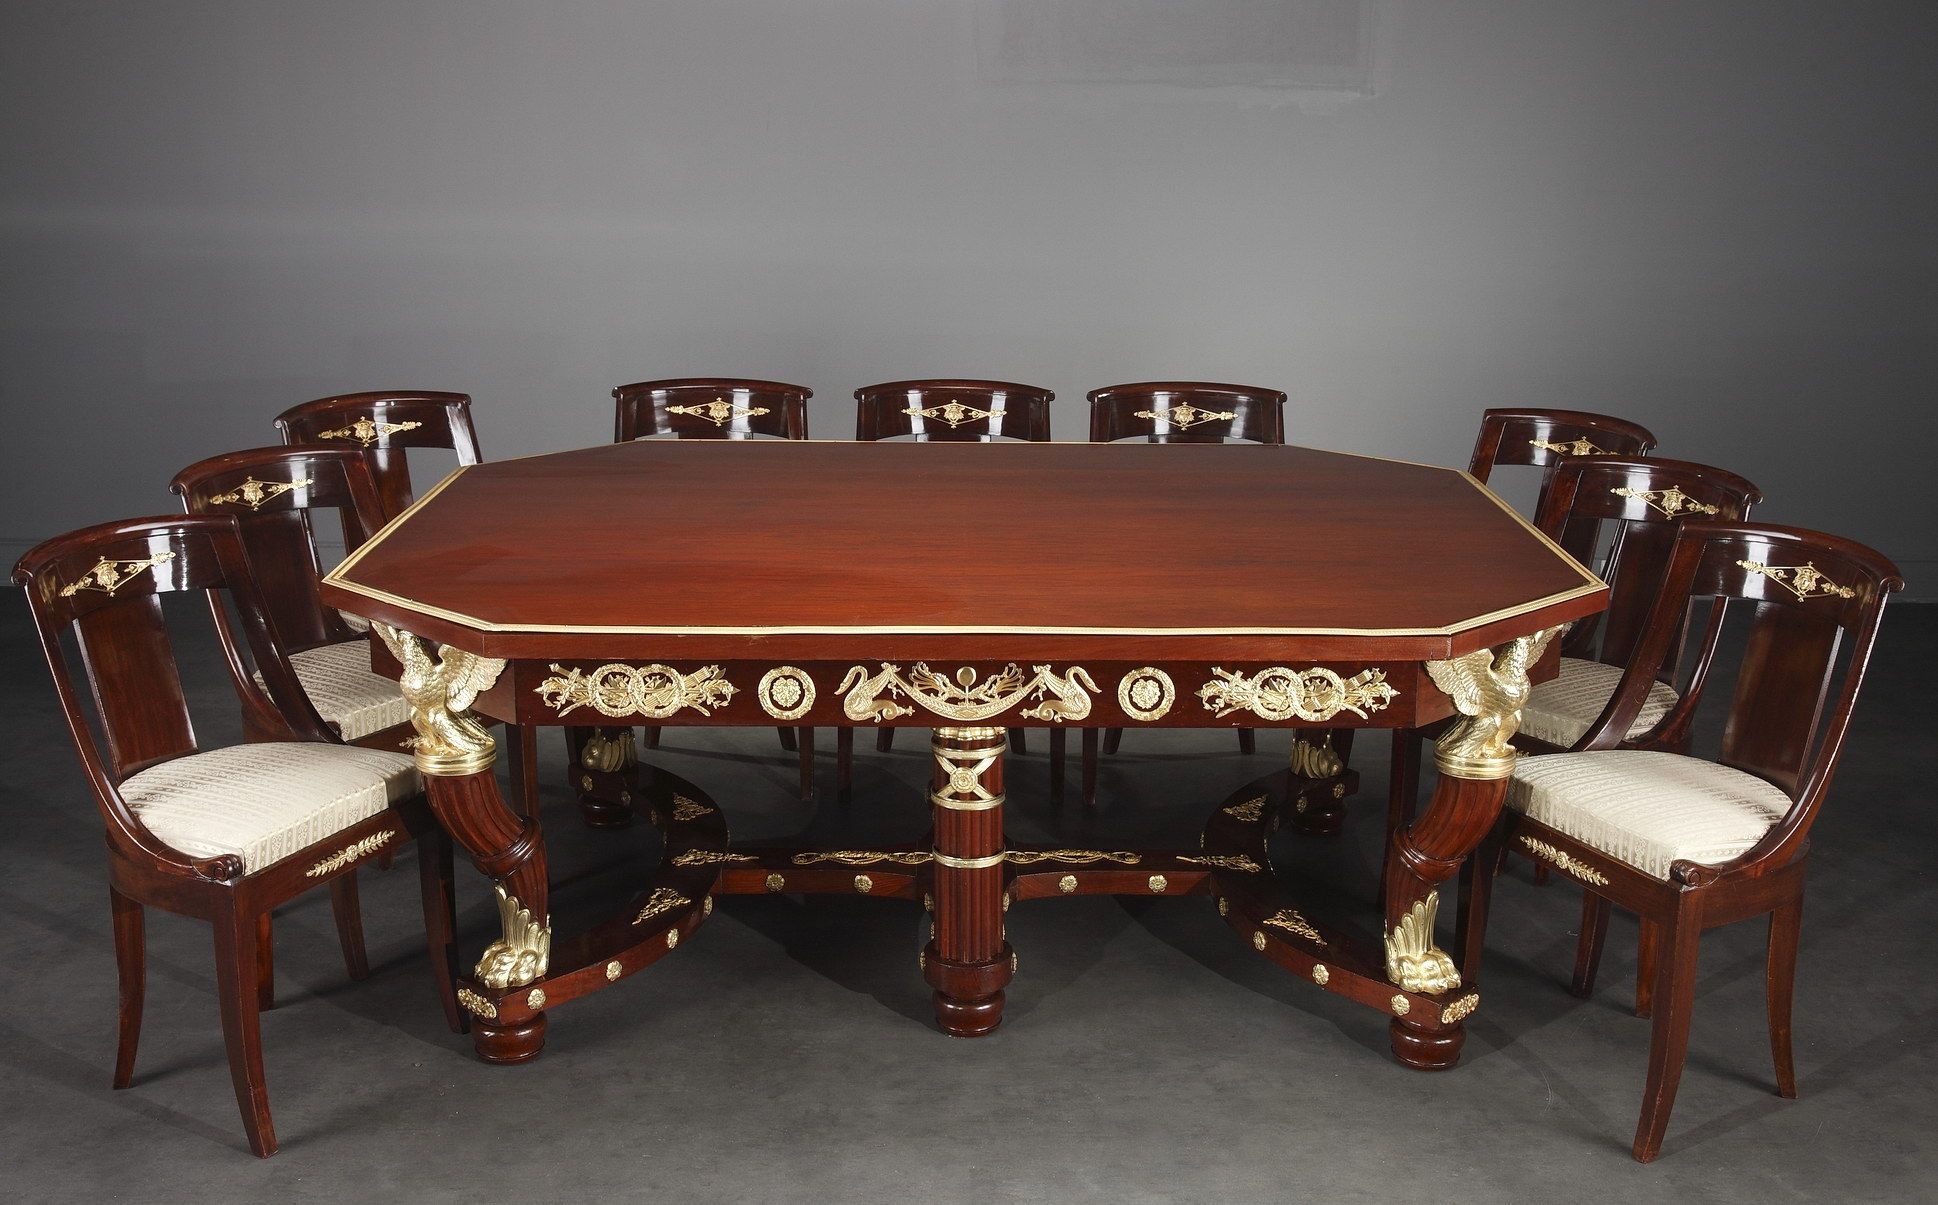 SET OF MAHOGANY AND BRONZE FURNITURE IN THE EMPIRE STYLE 